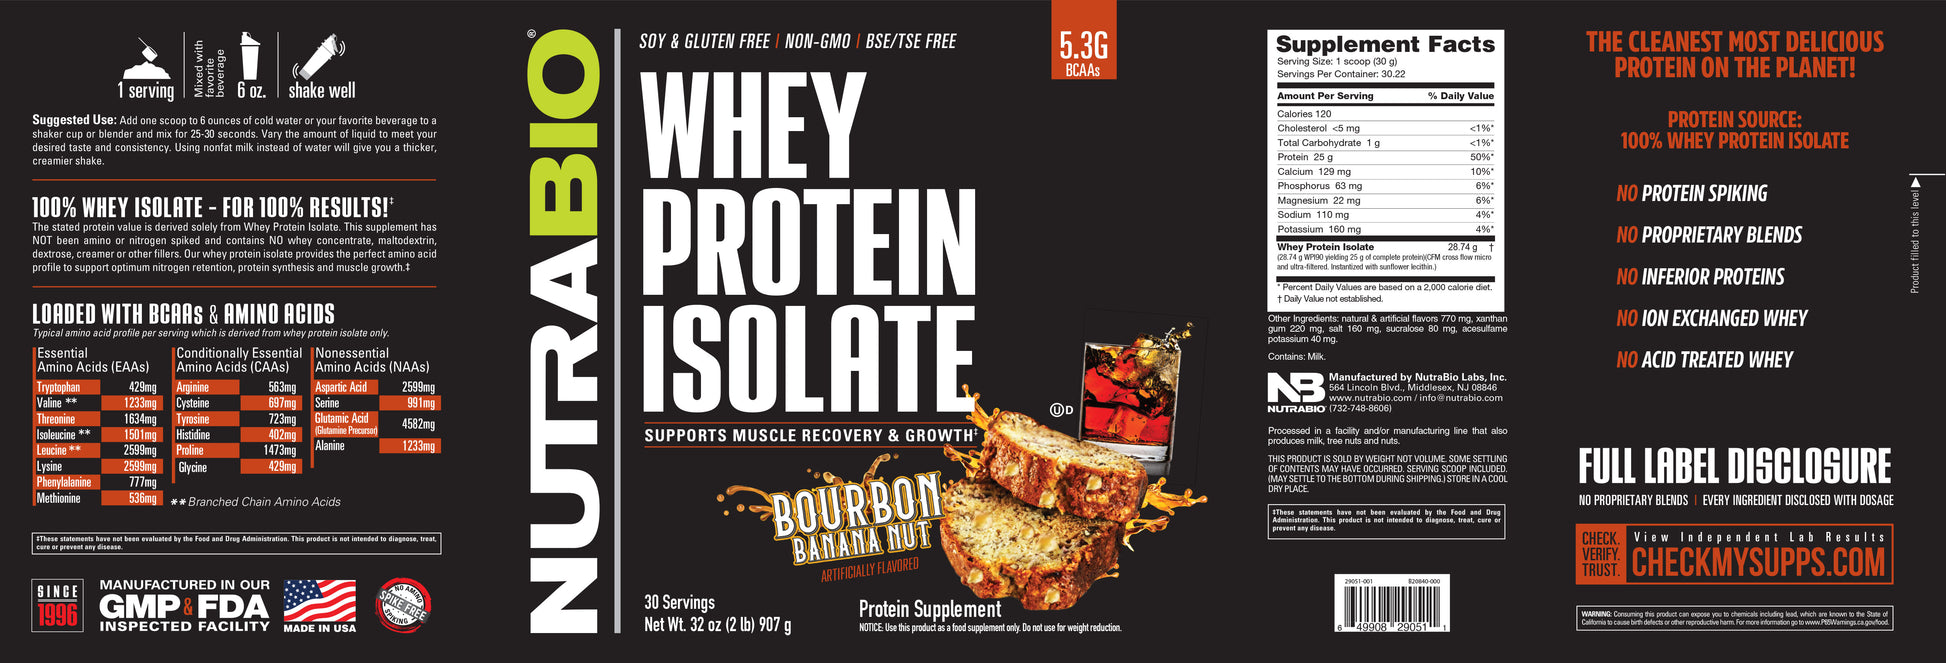 Whey Protein Isolate – NutraBio Brands